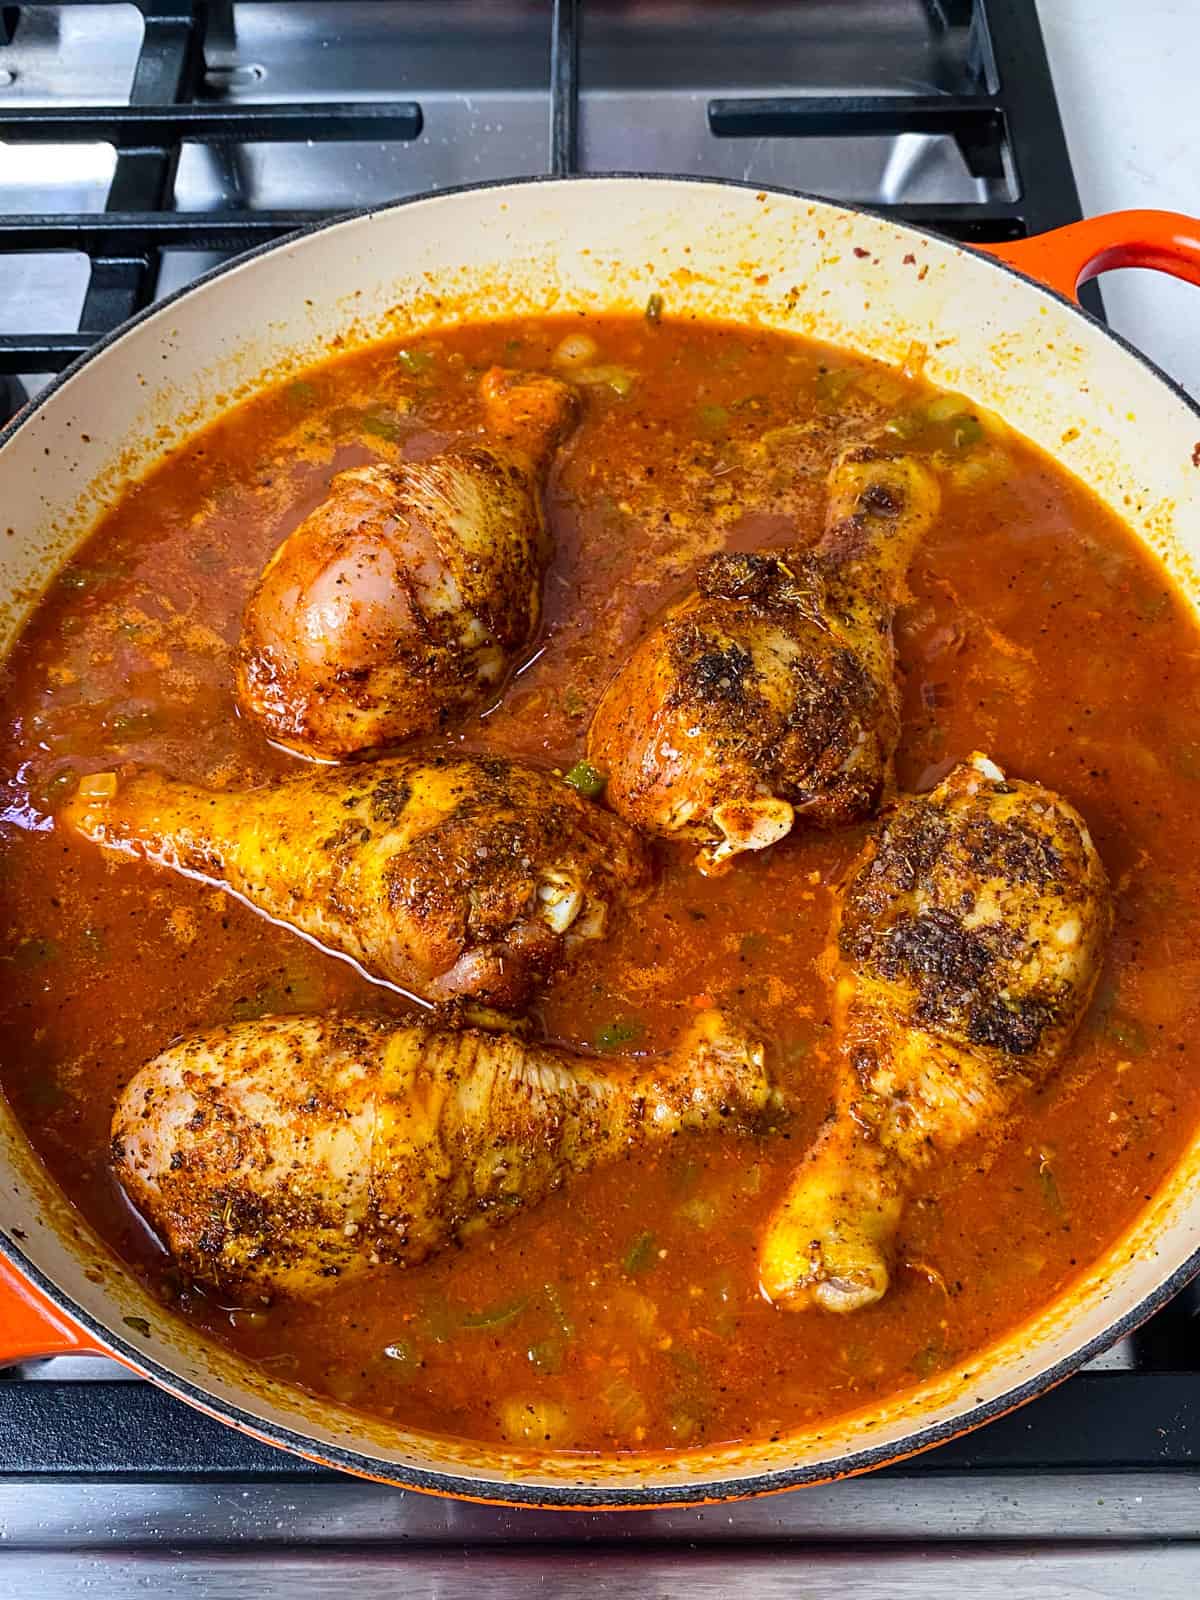 Add the seared chicken to the tomato and stock mixture.